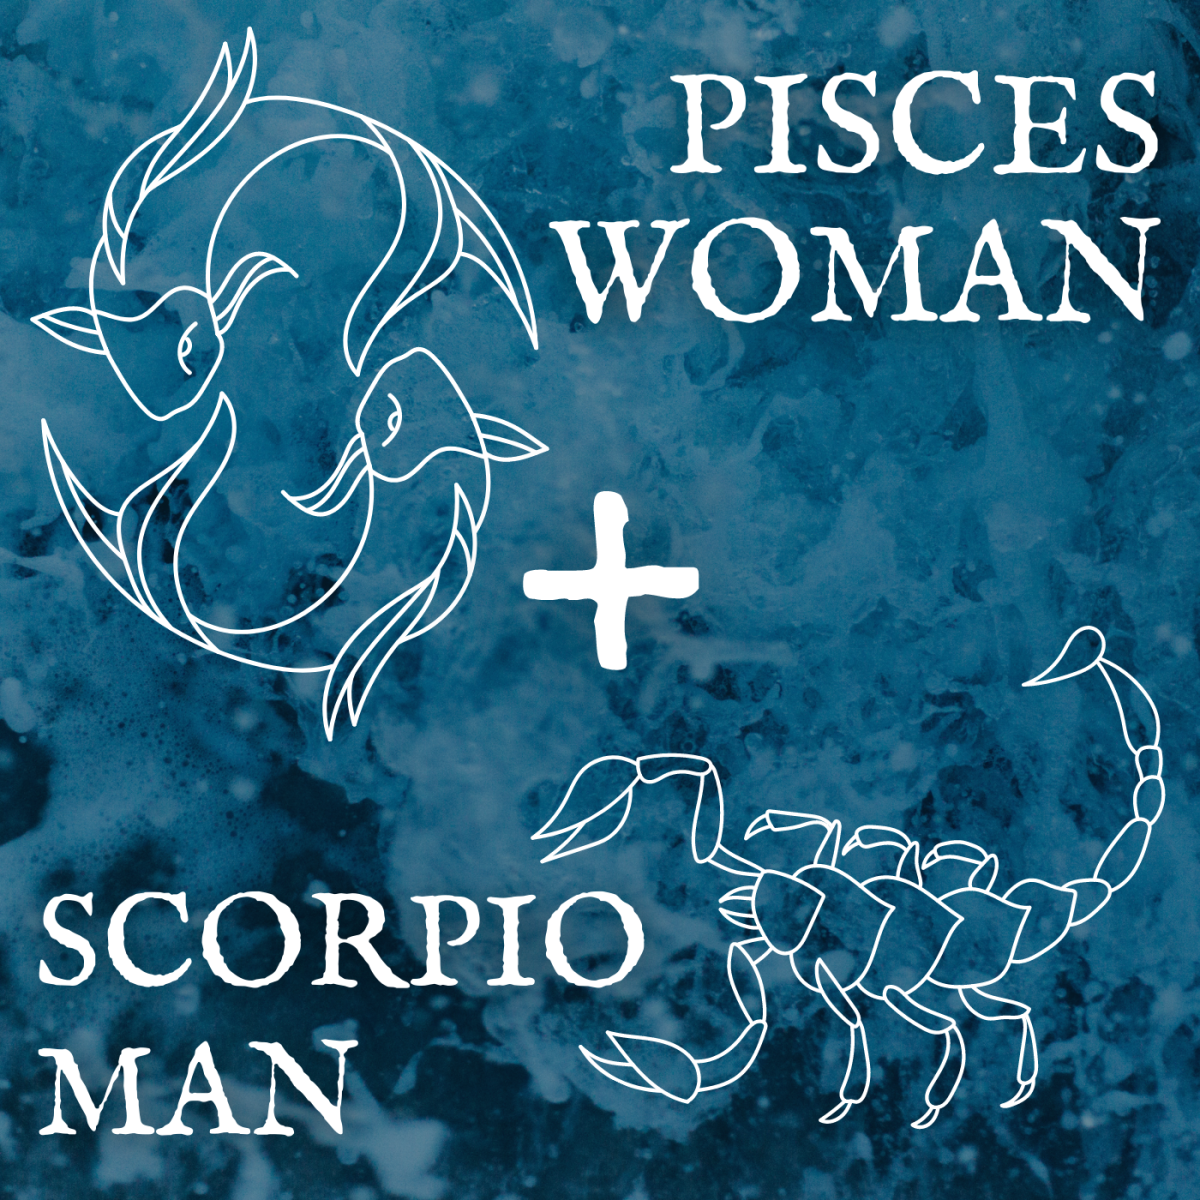 Scorpio Man and Pisces Woman